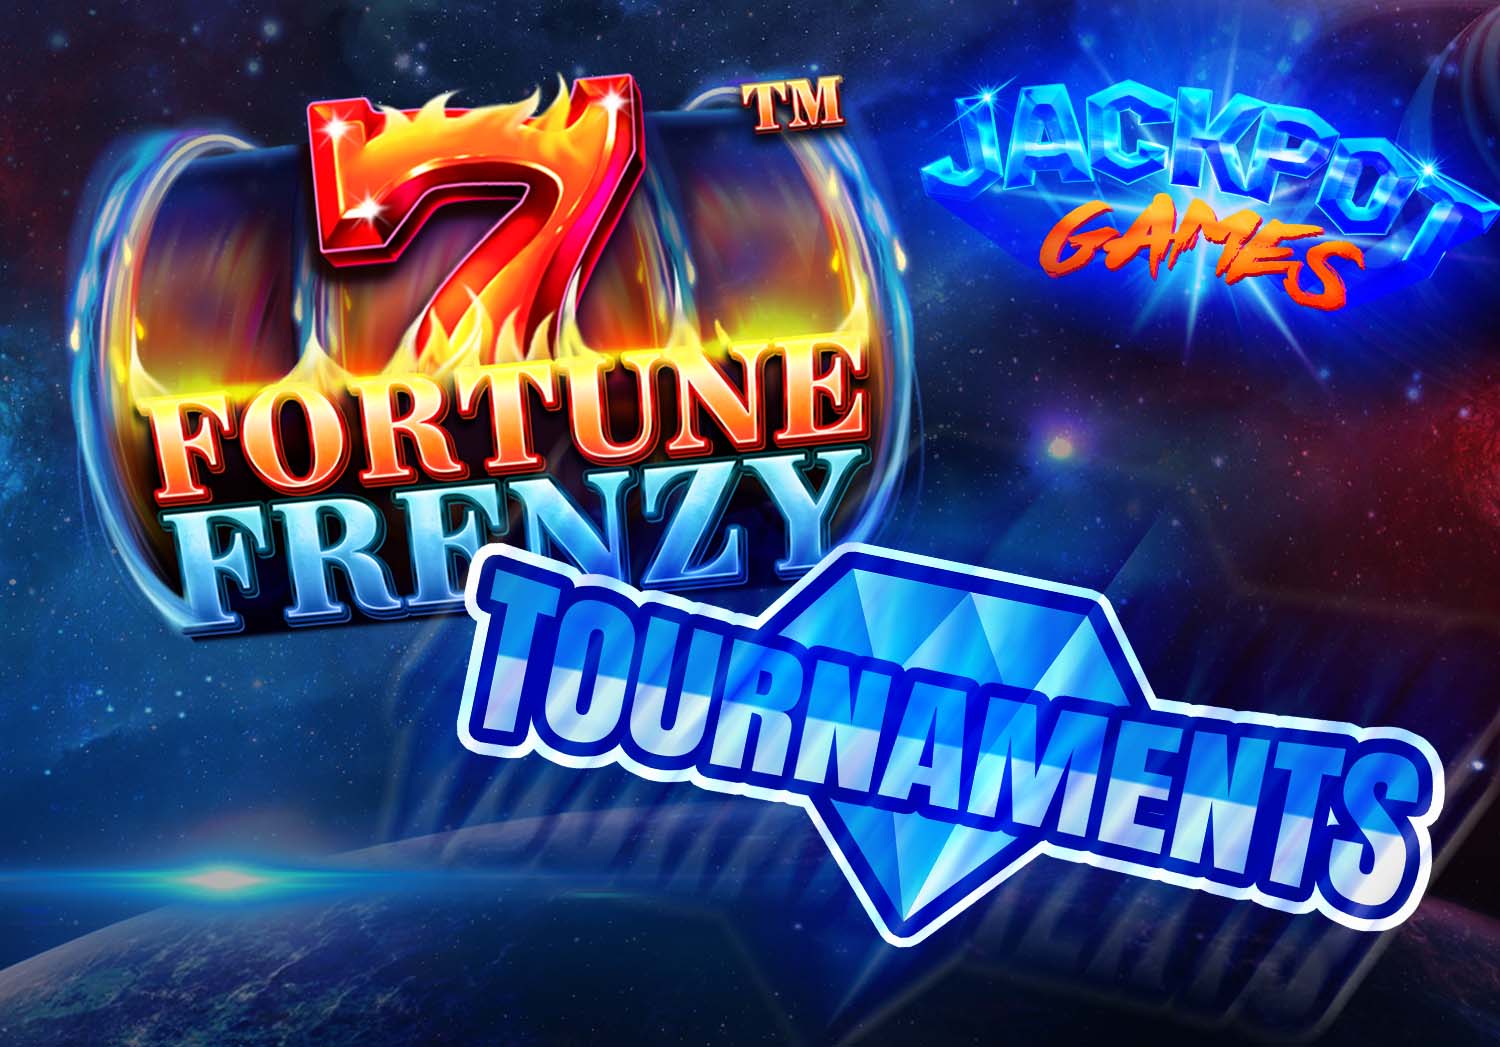 7 Fortune Frenzy, Jackpotgames and casino Tournaments